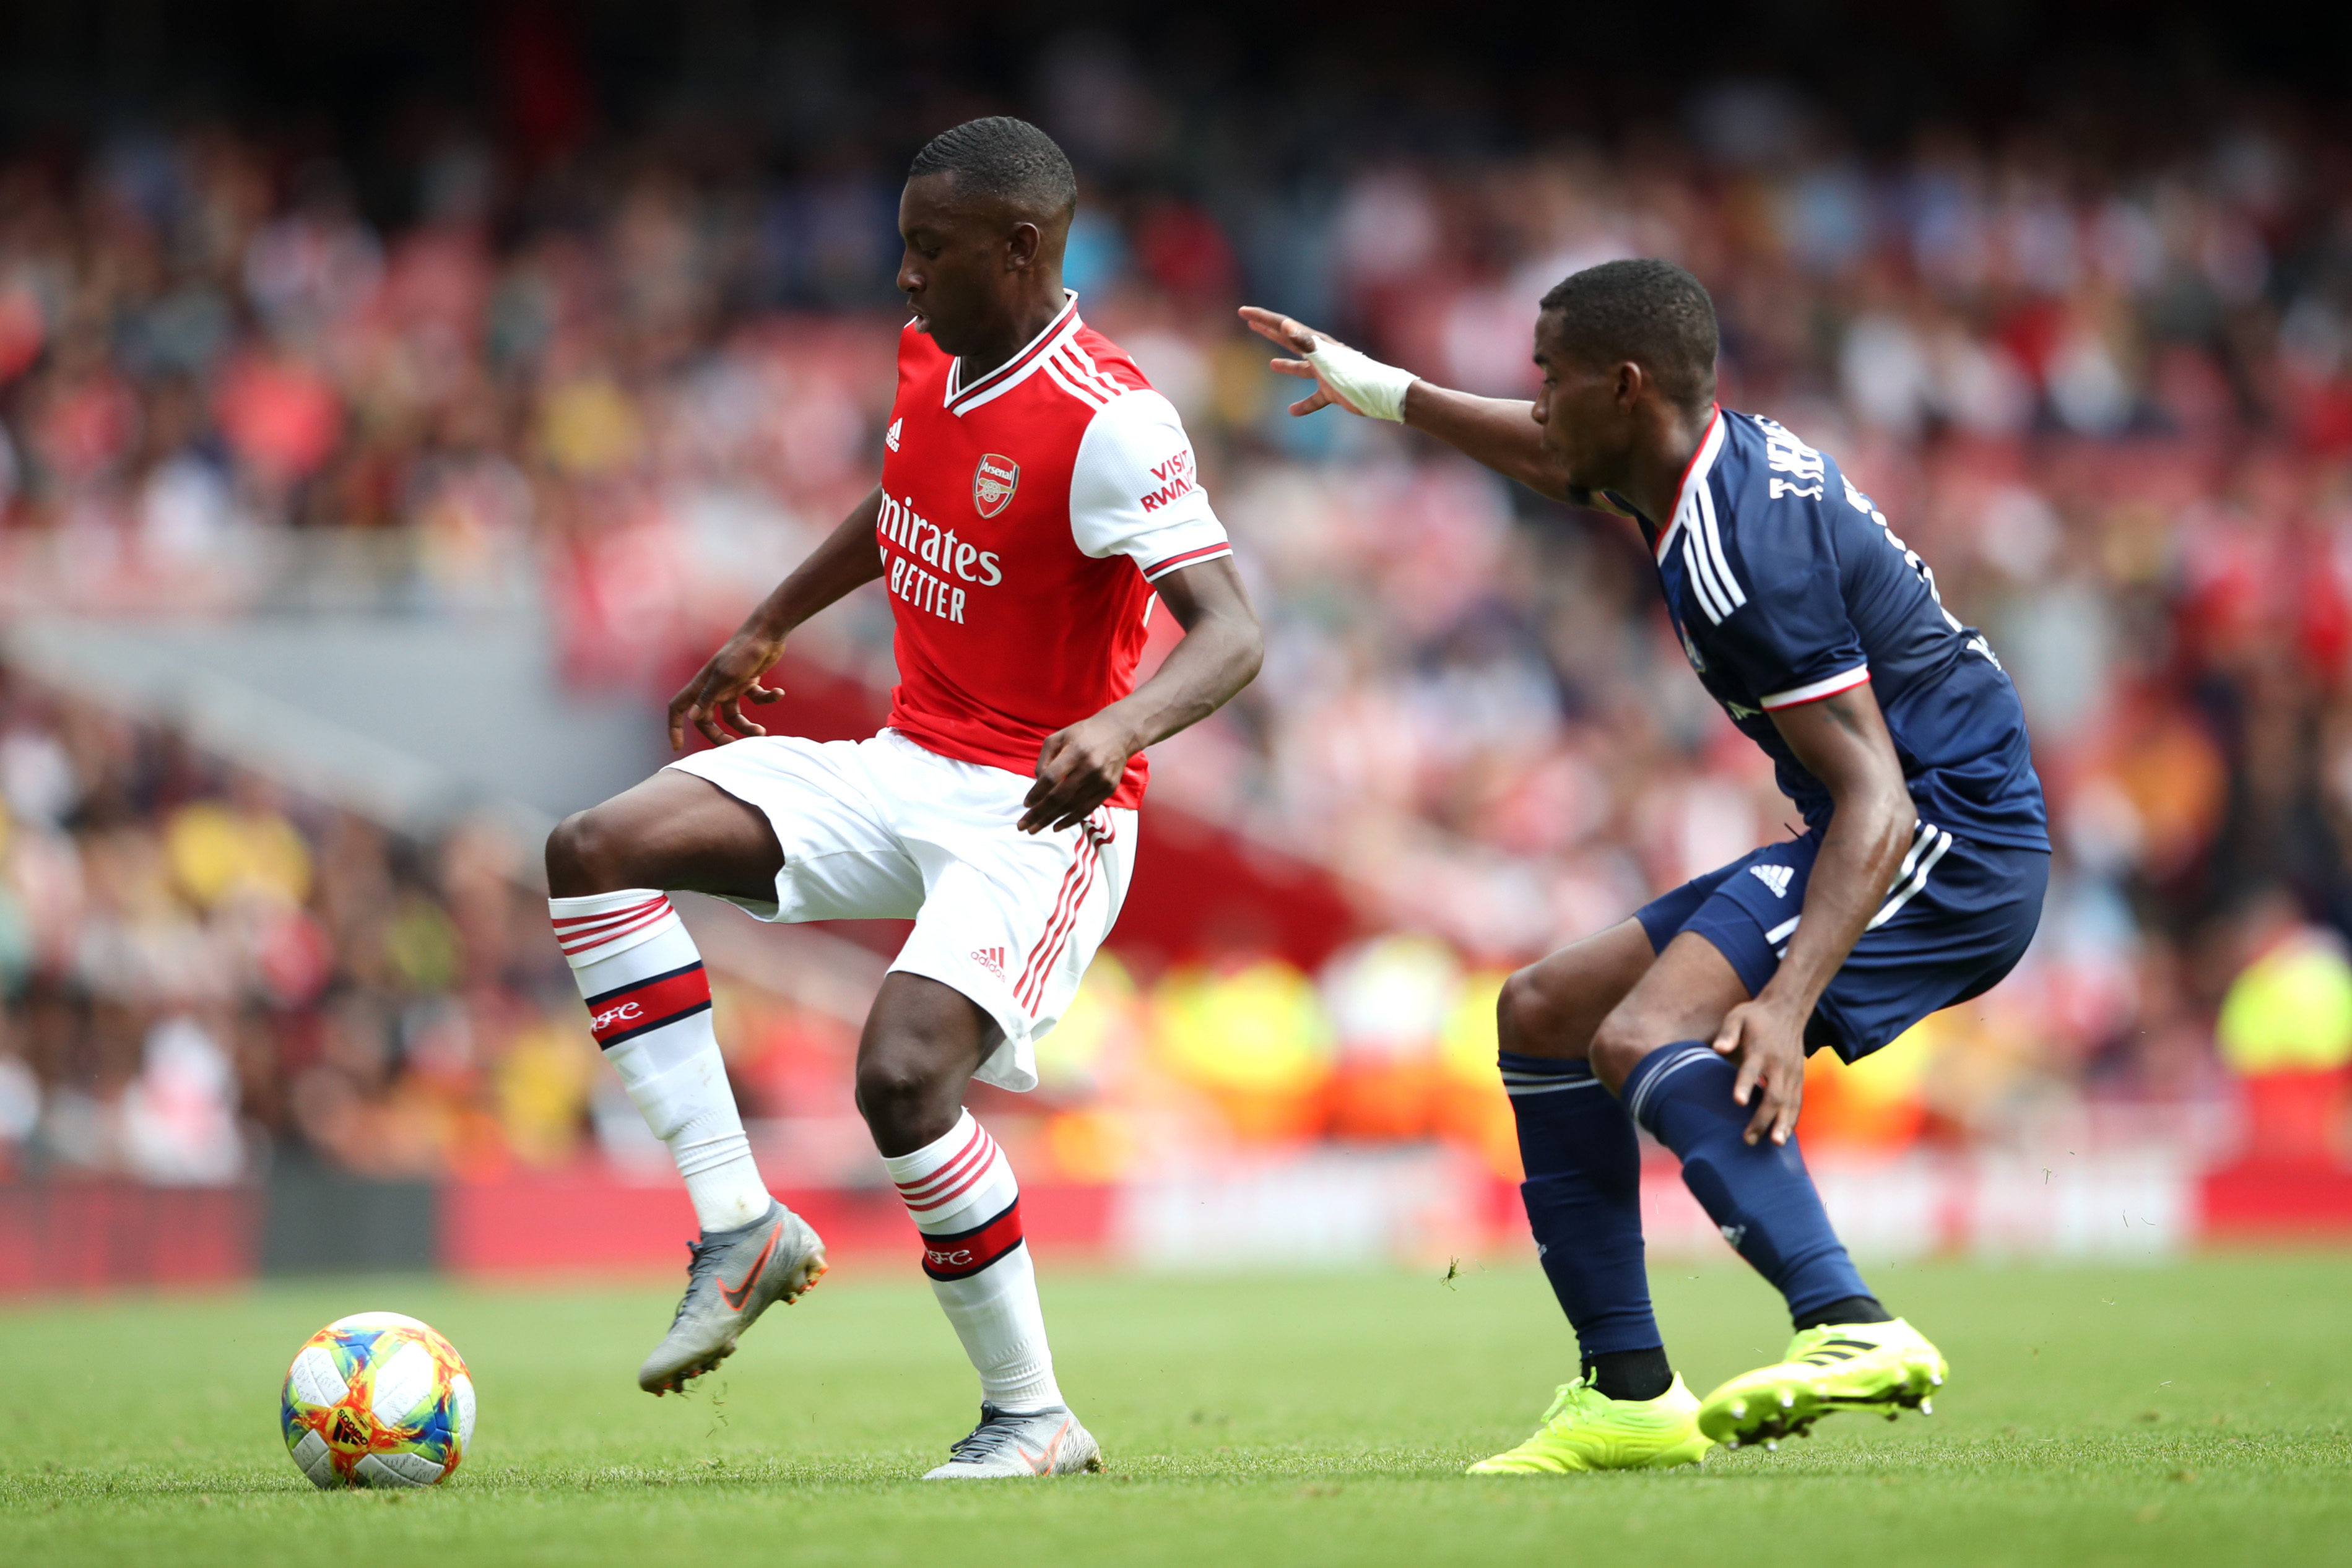 Eddie Nketiah is set for a loan spell at Leeds United. (Photo courtesy: AFP/Getty)